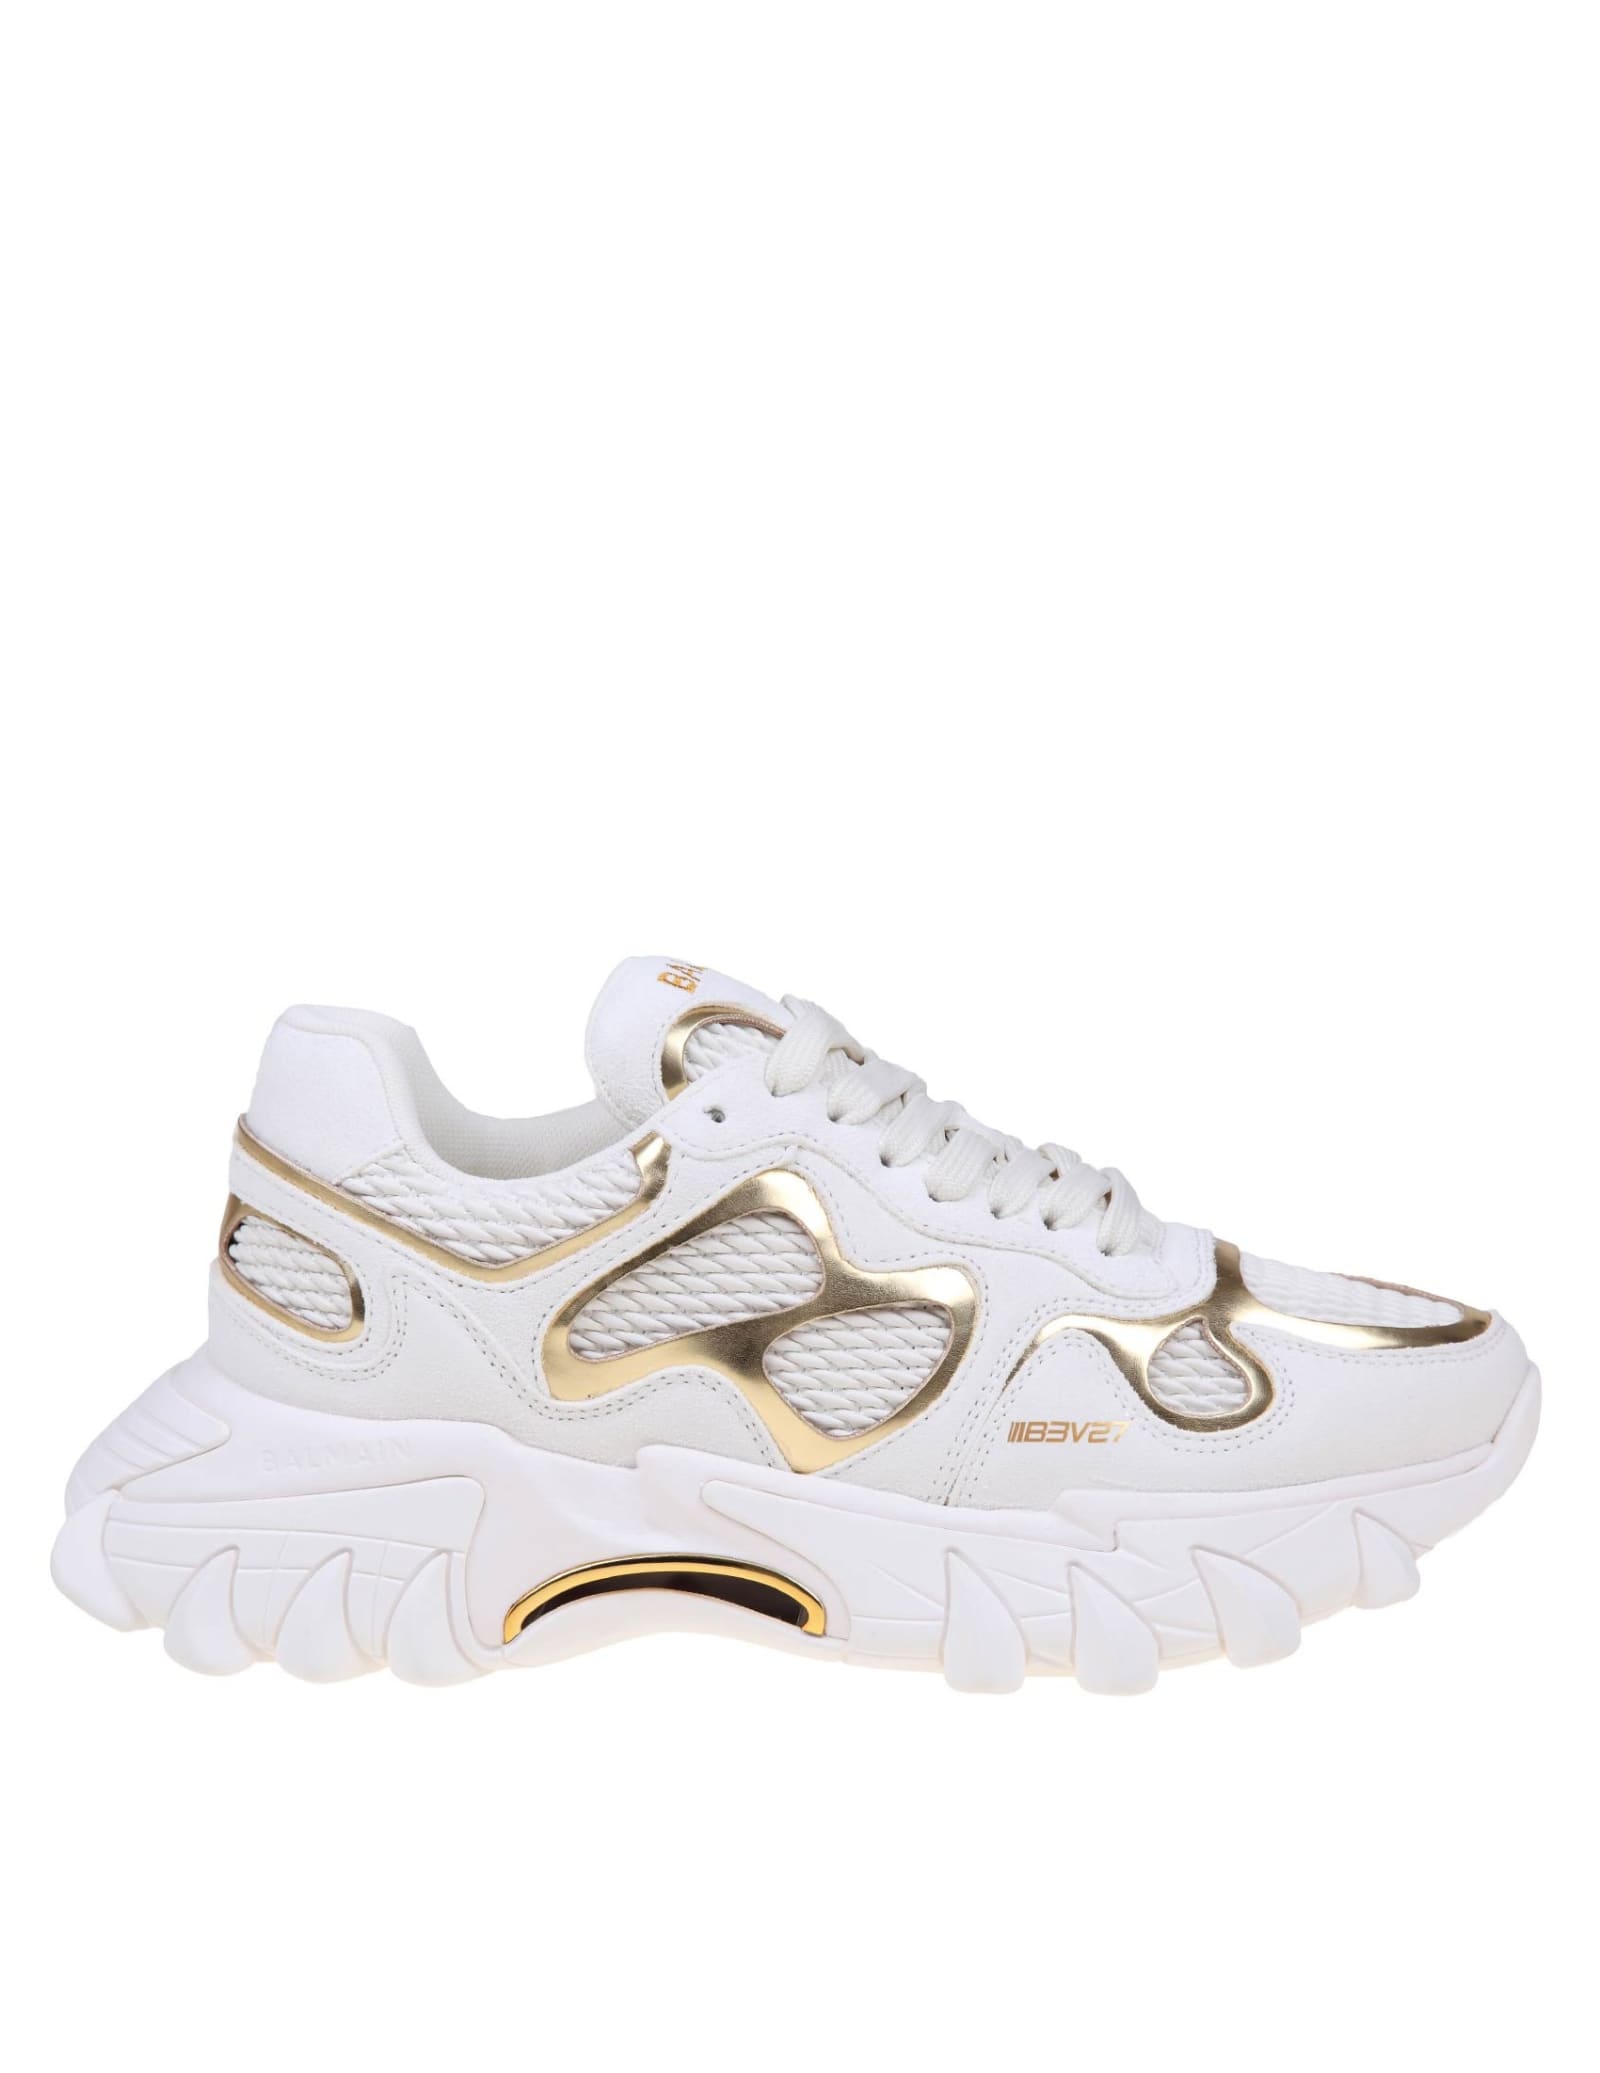 B-east Sneakers In White And Gold Suede And Leather